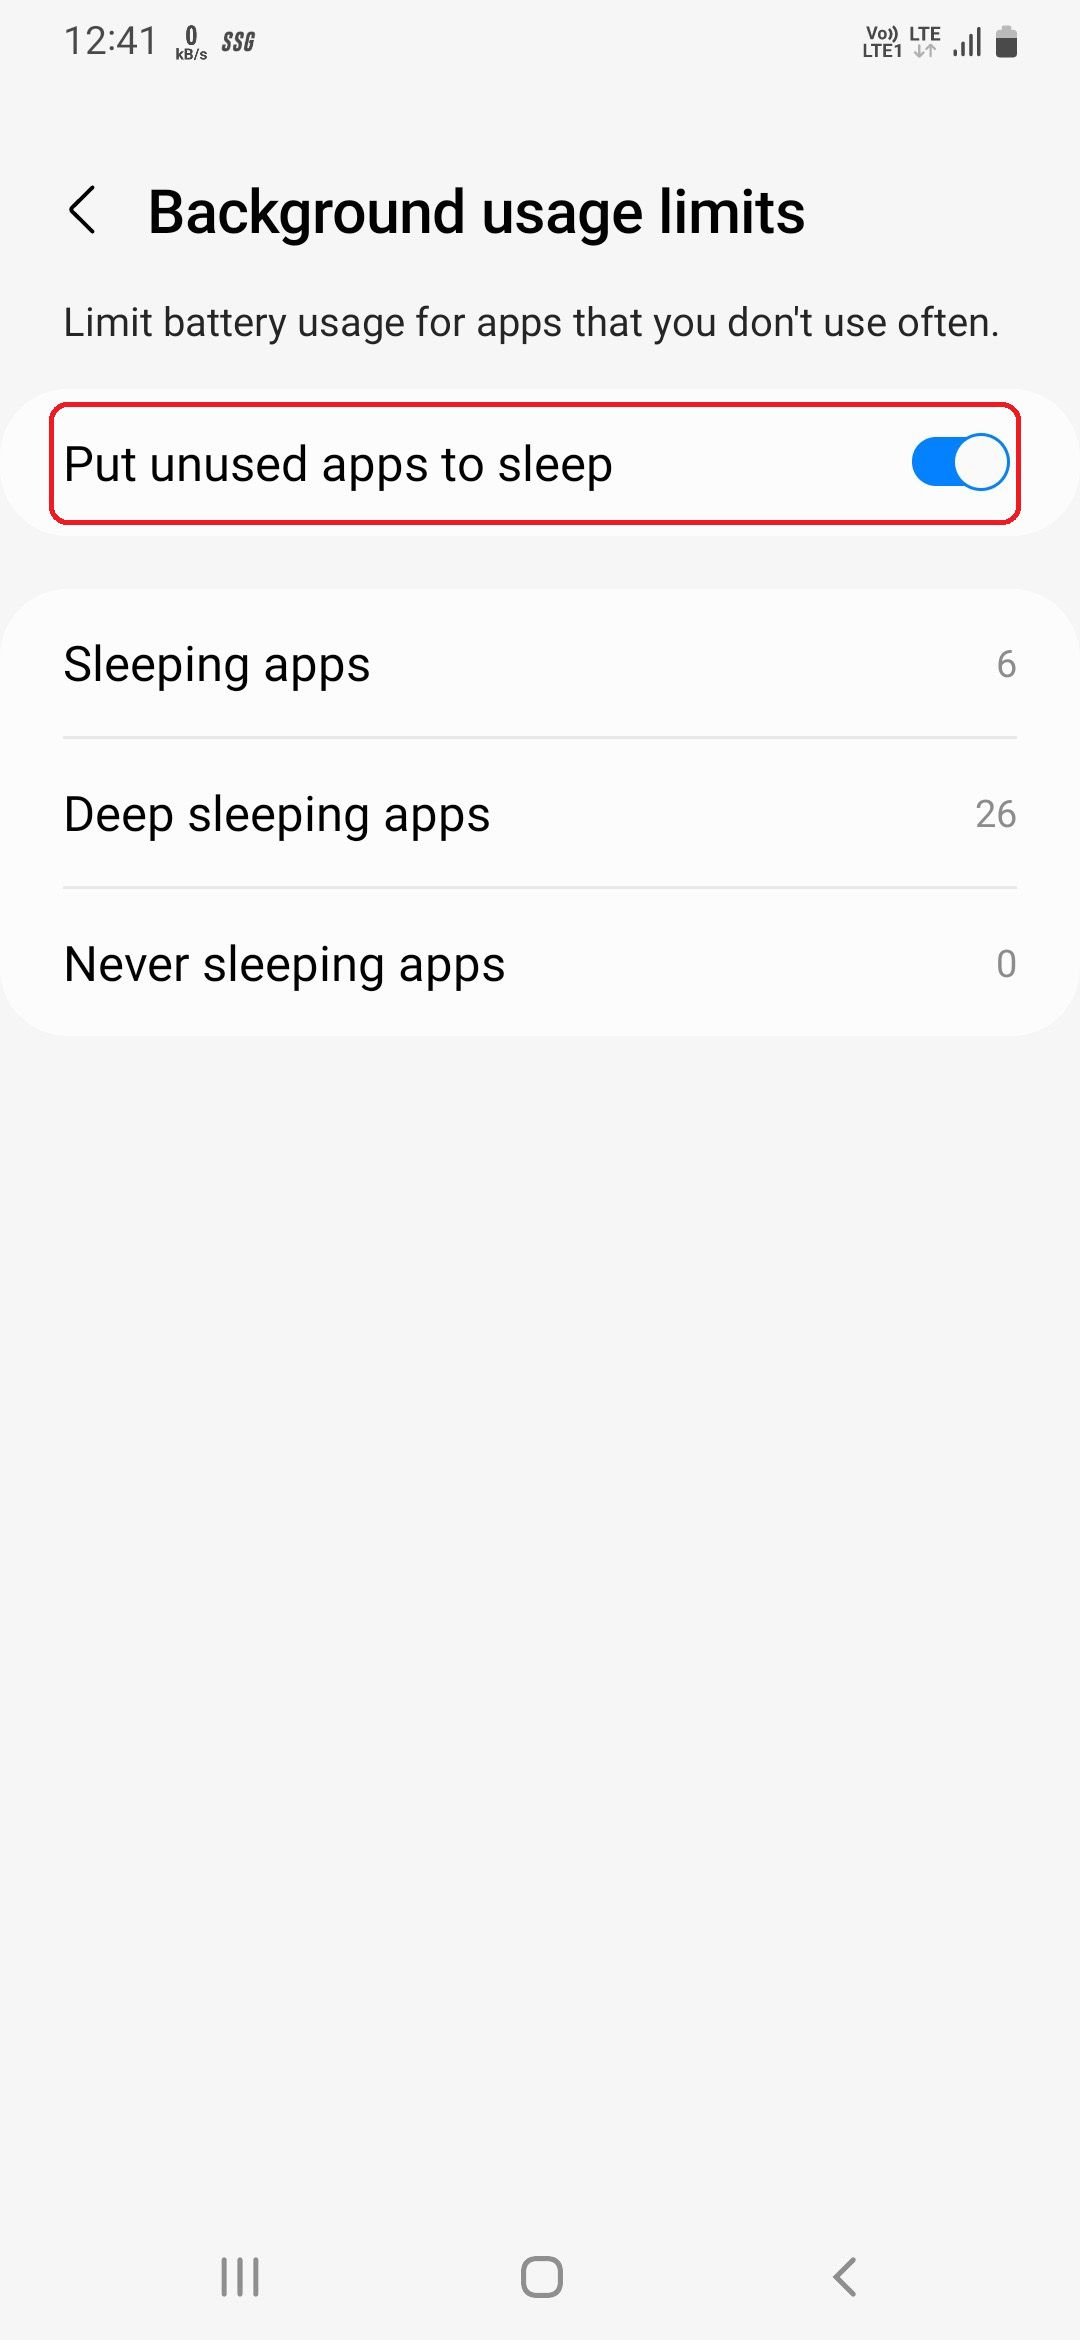 Option to turn off sleeping apps